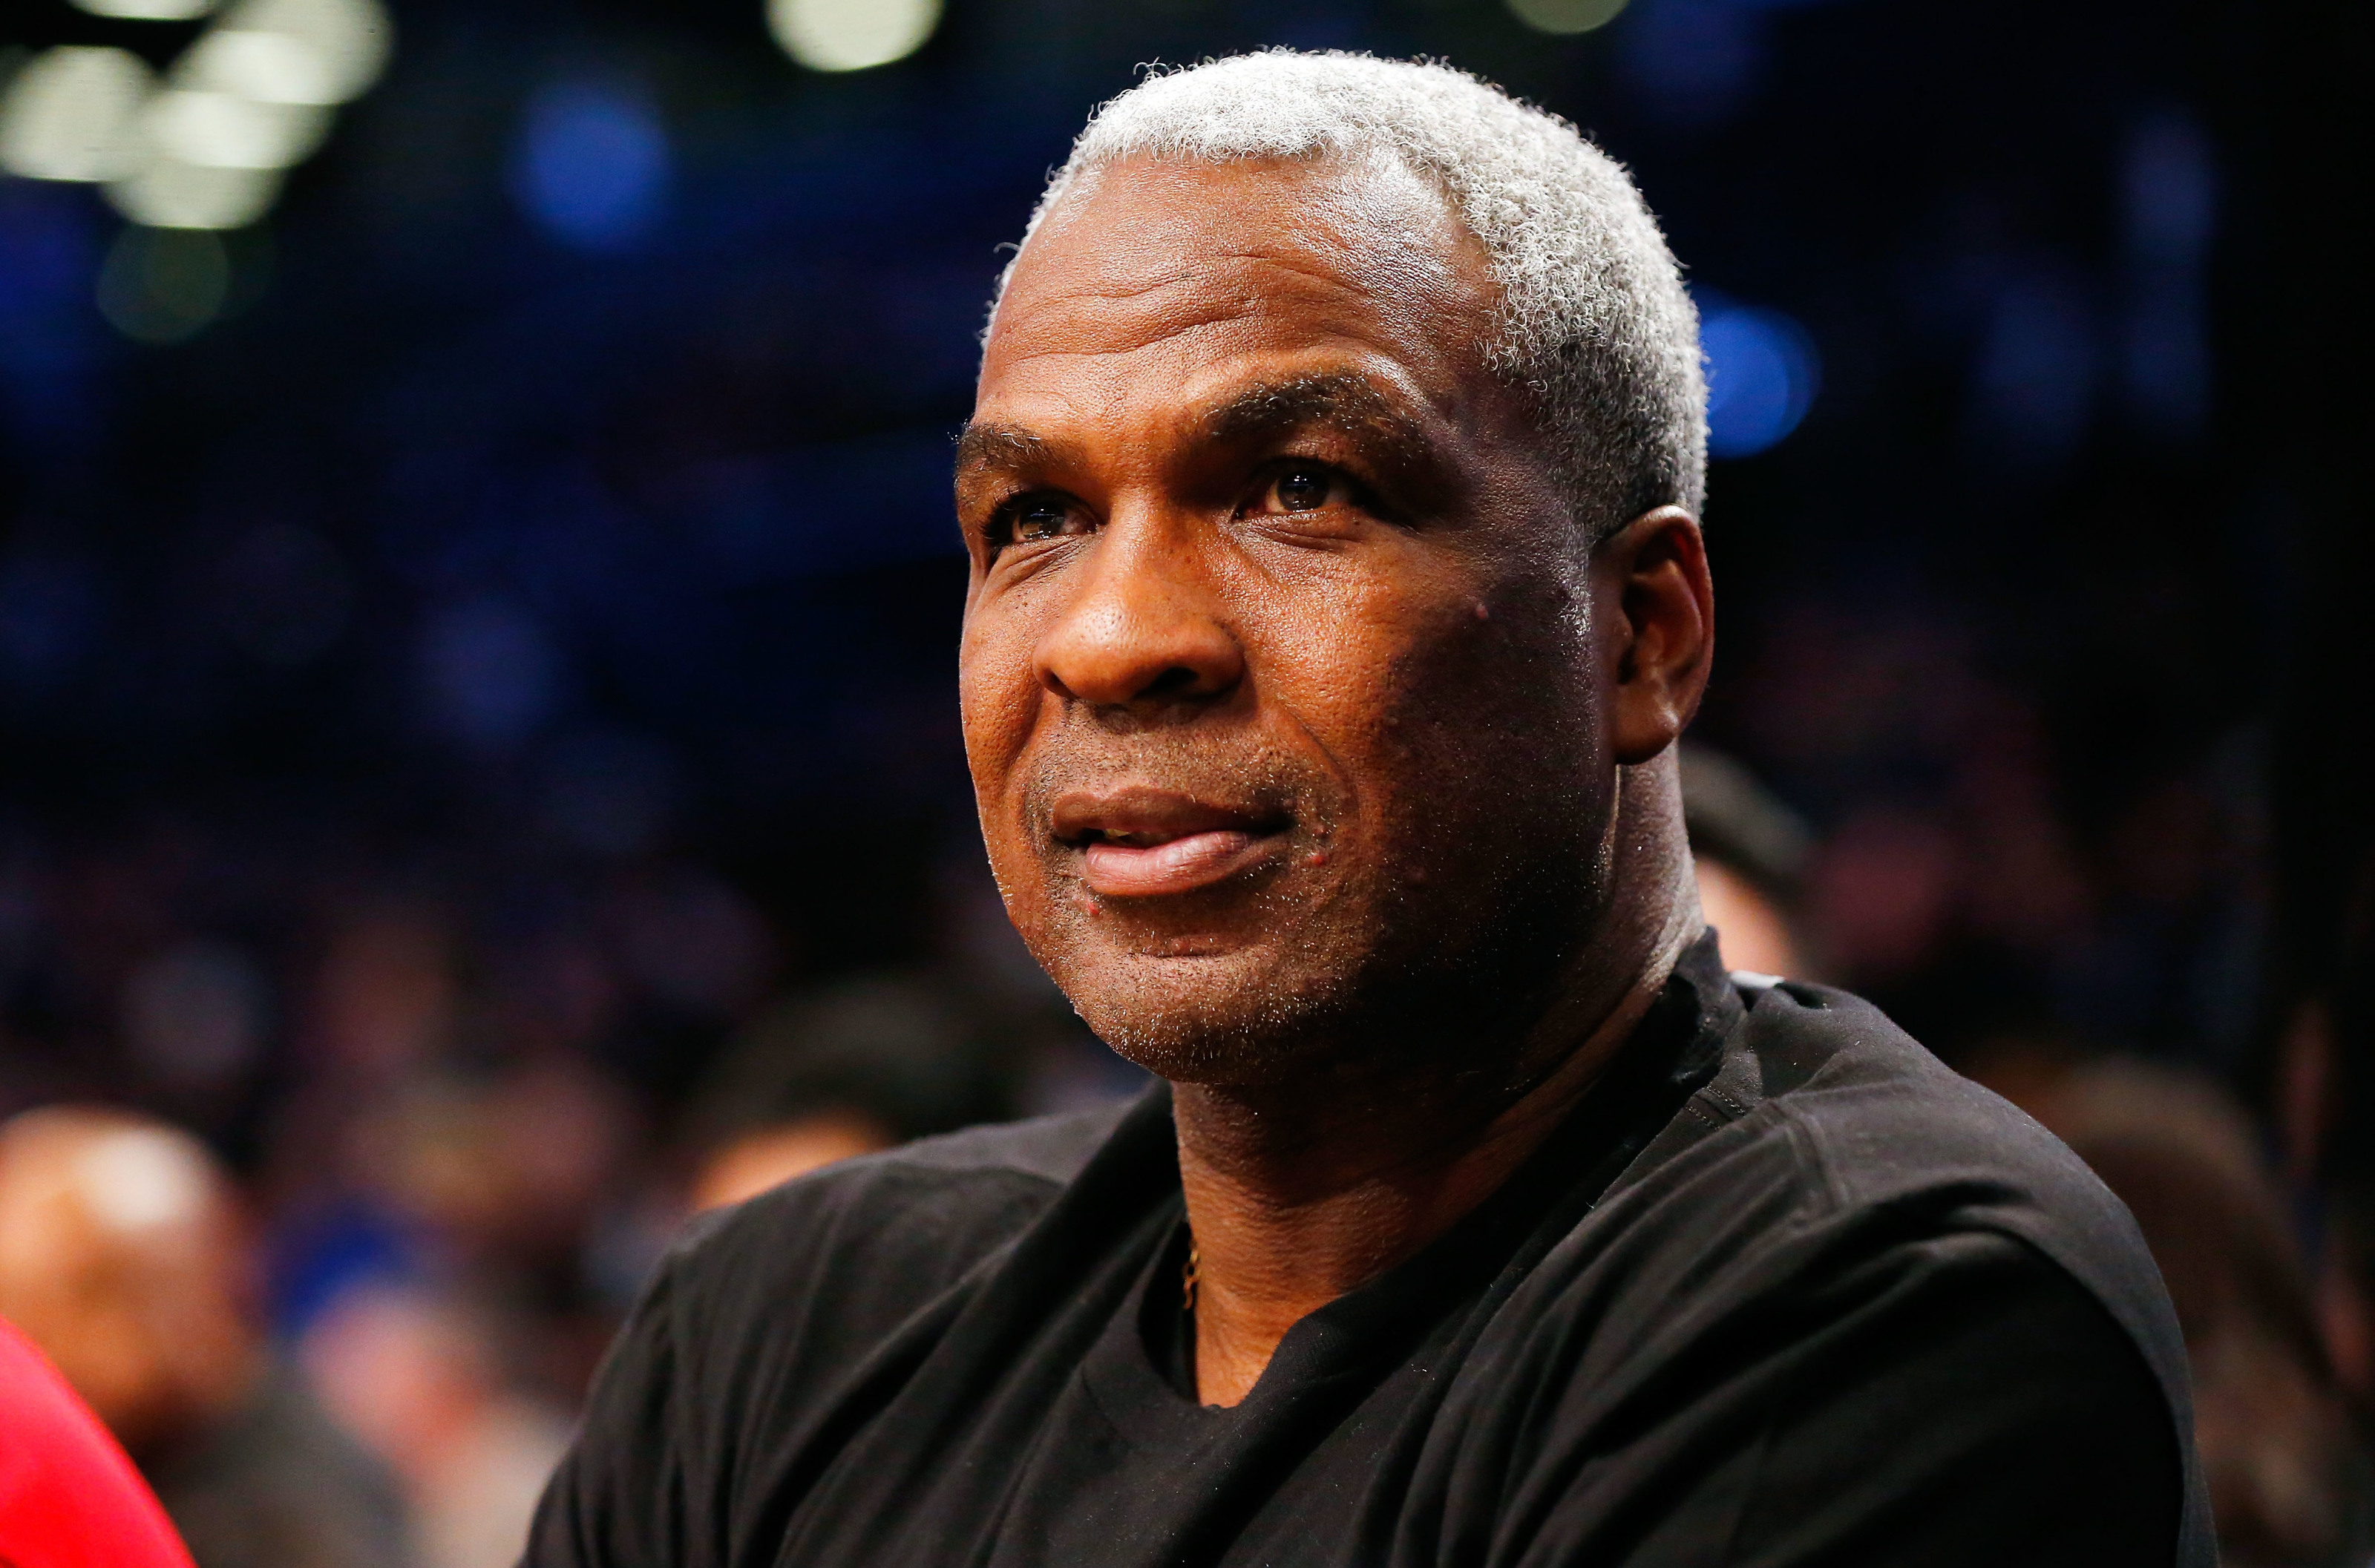 Charles Oakley blames Patrick Ewing for the “Charles Smith Game